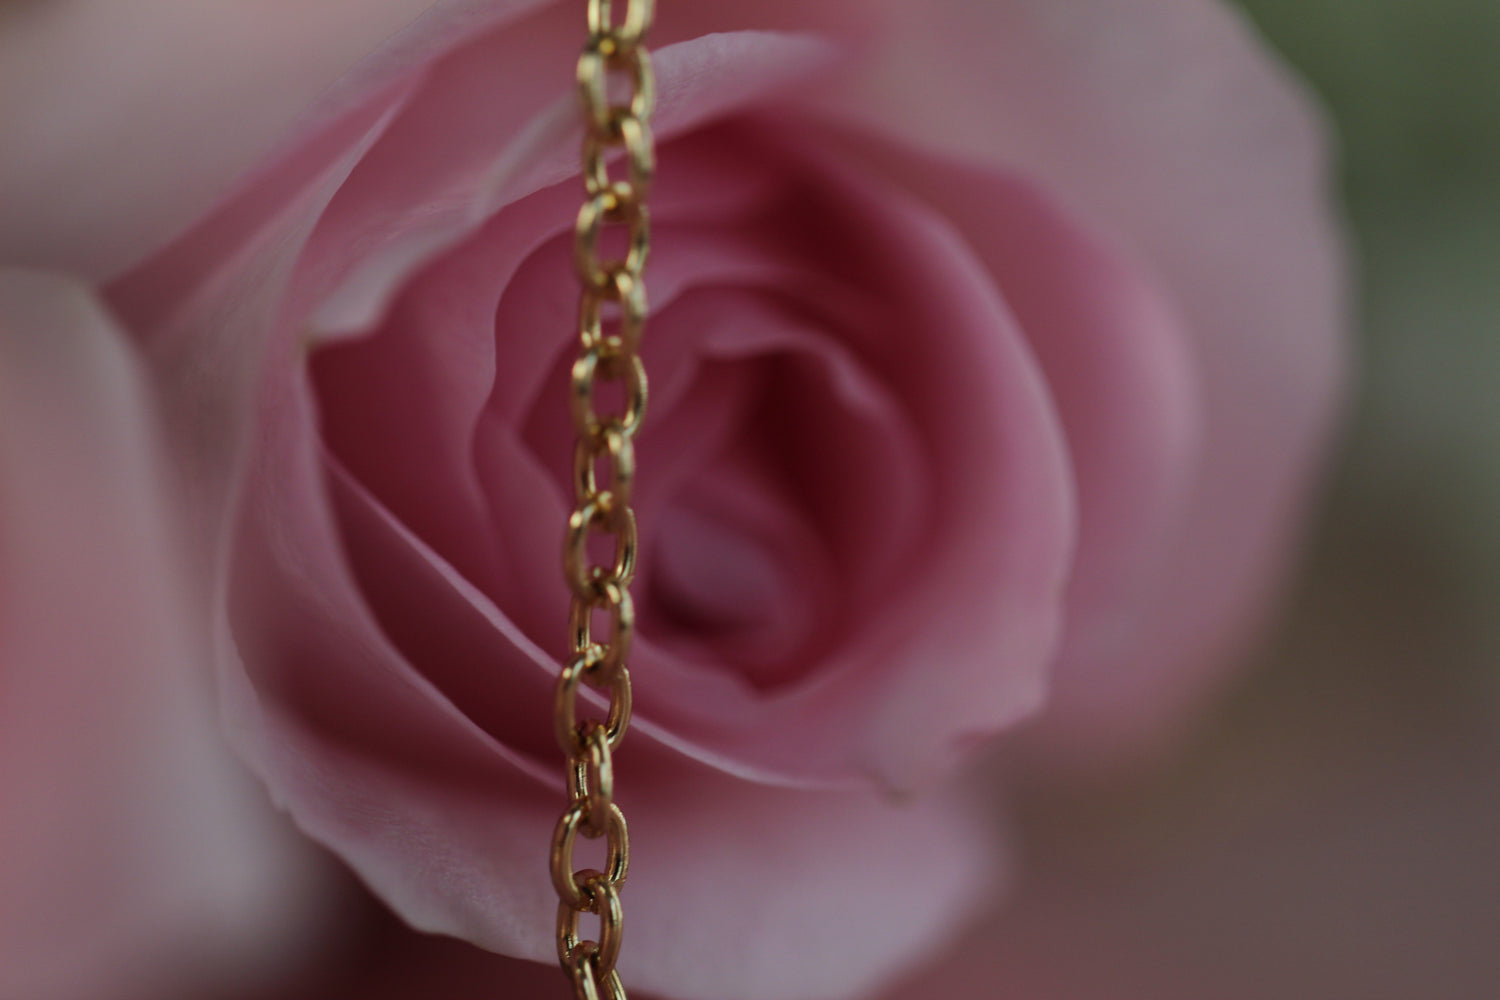 Pink rose in full bloom draped by a gold chain